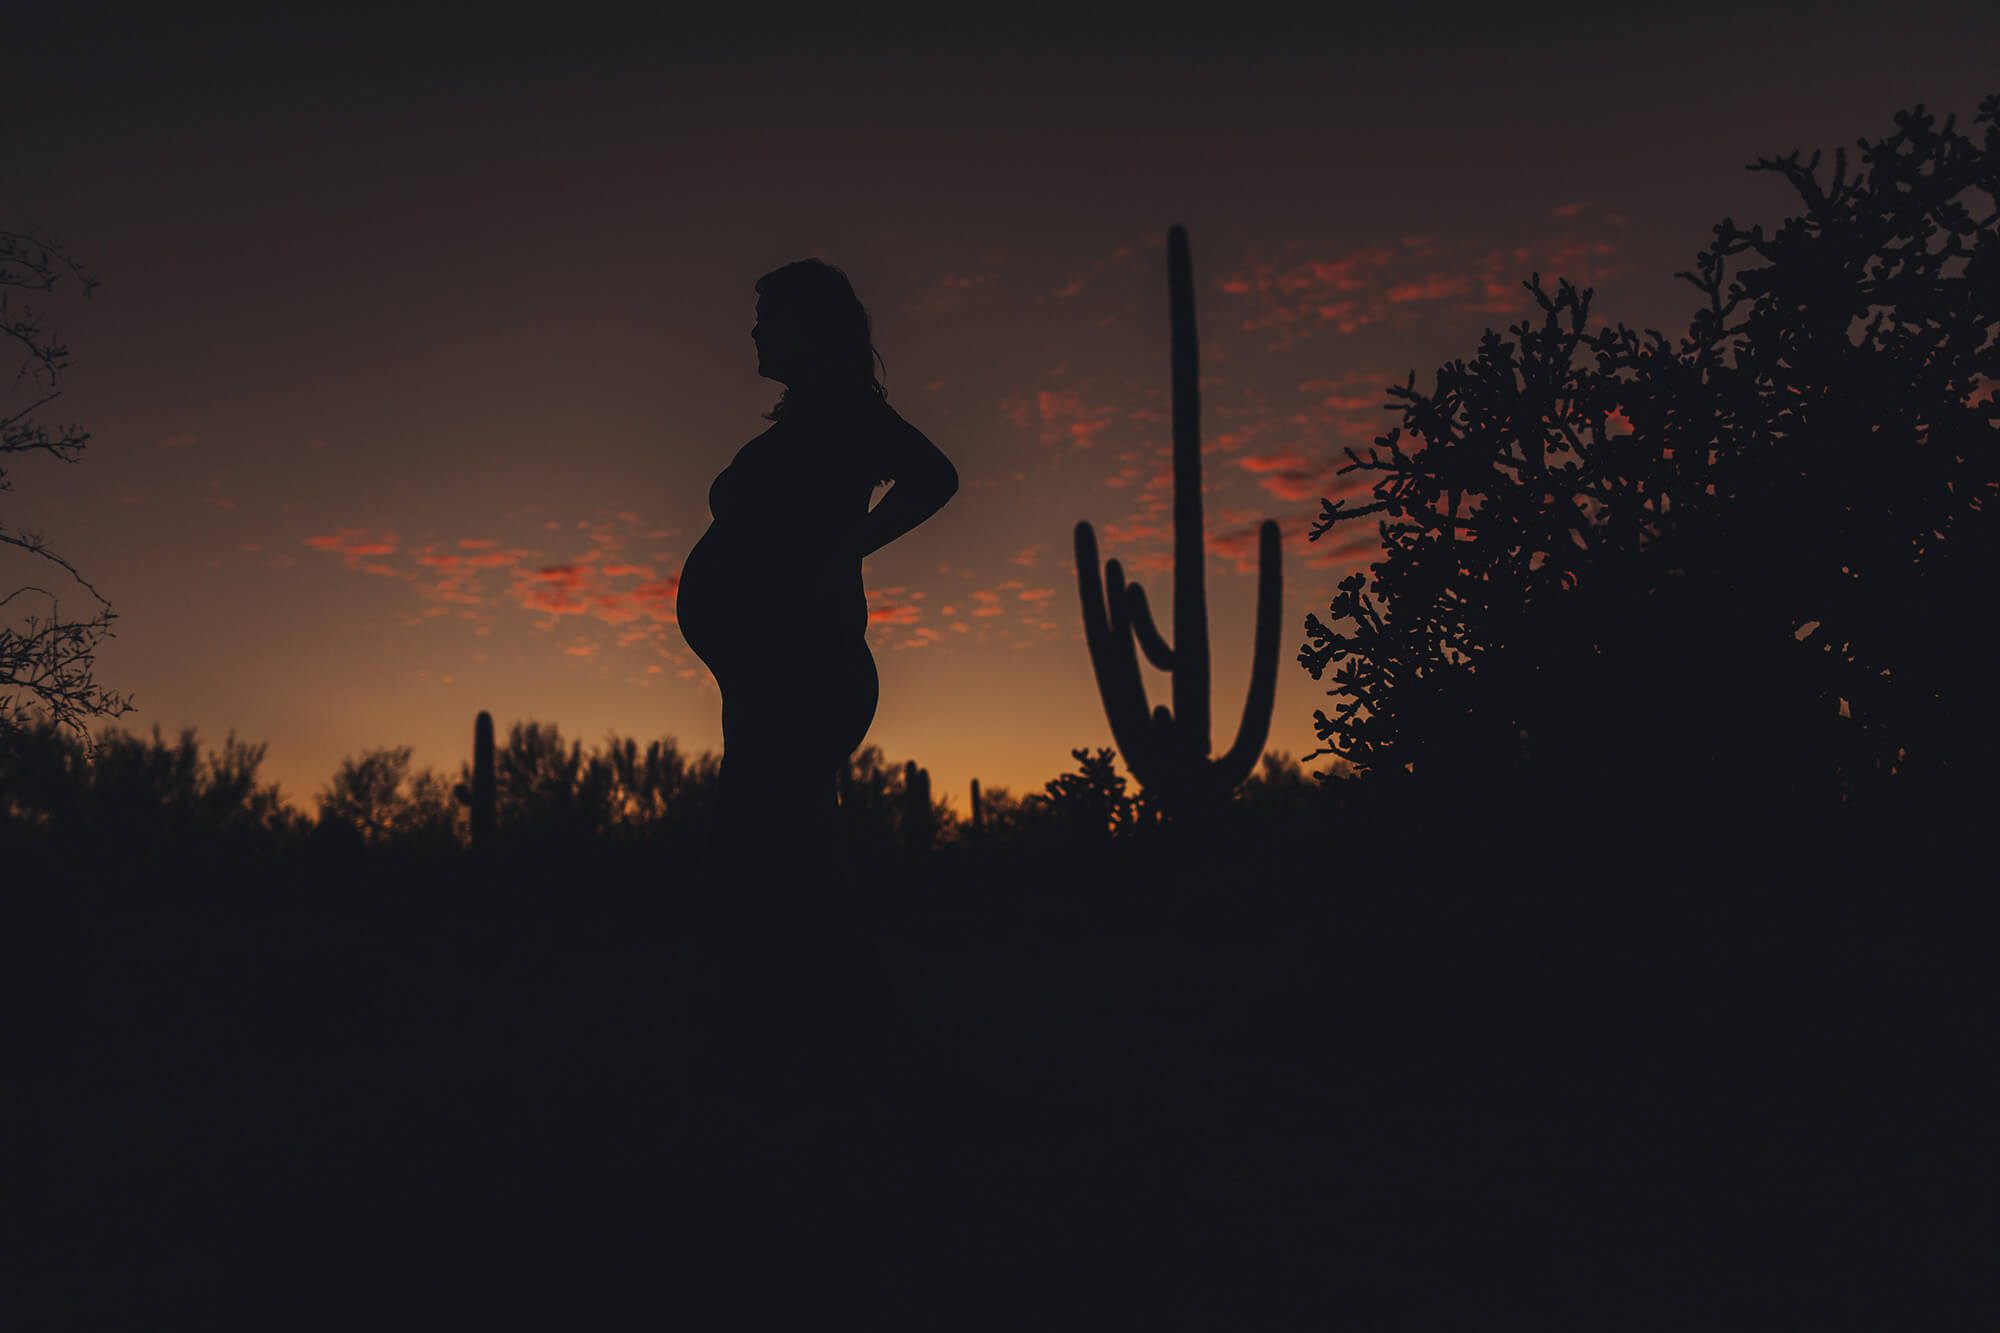 Alicia silhouetted by a magical Tucson sunset.